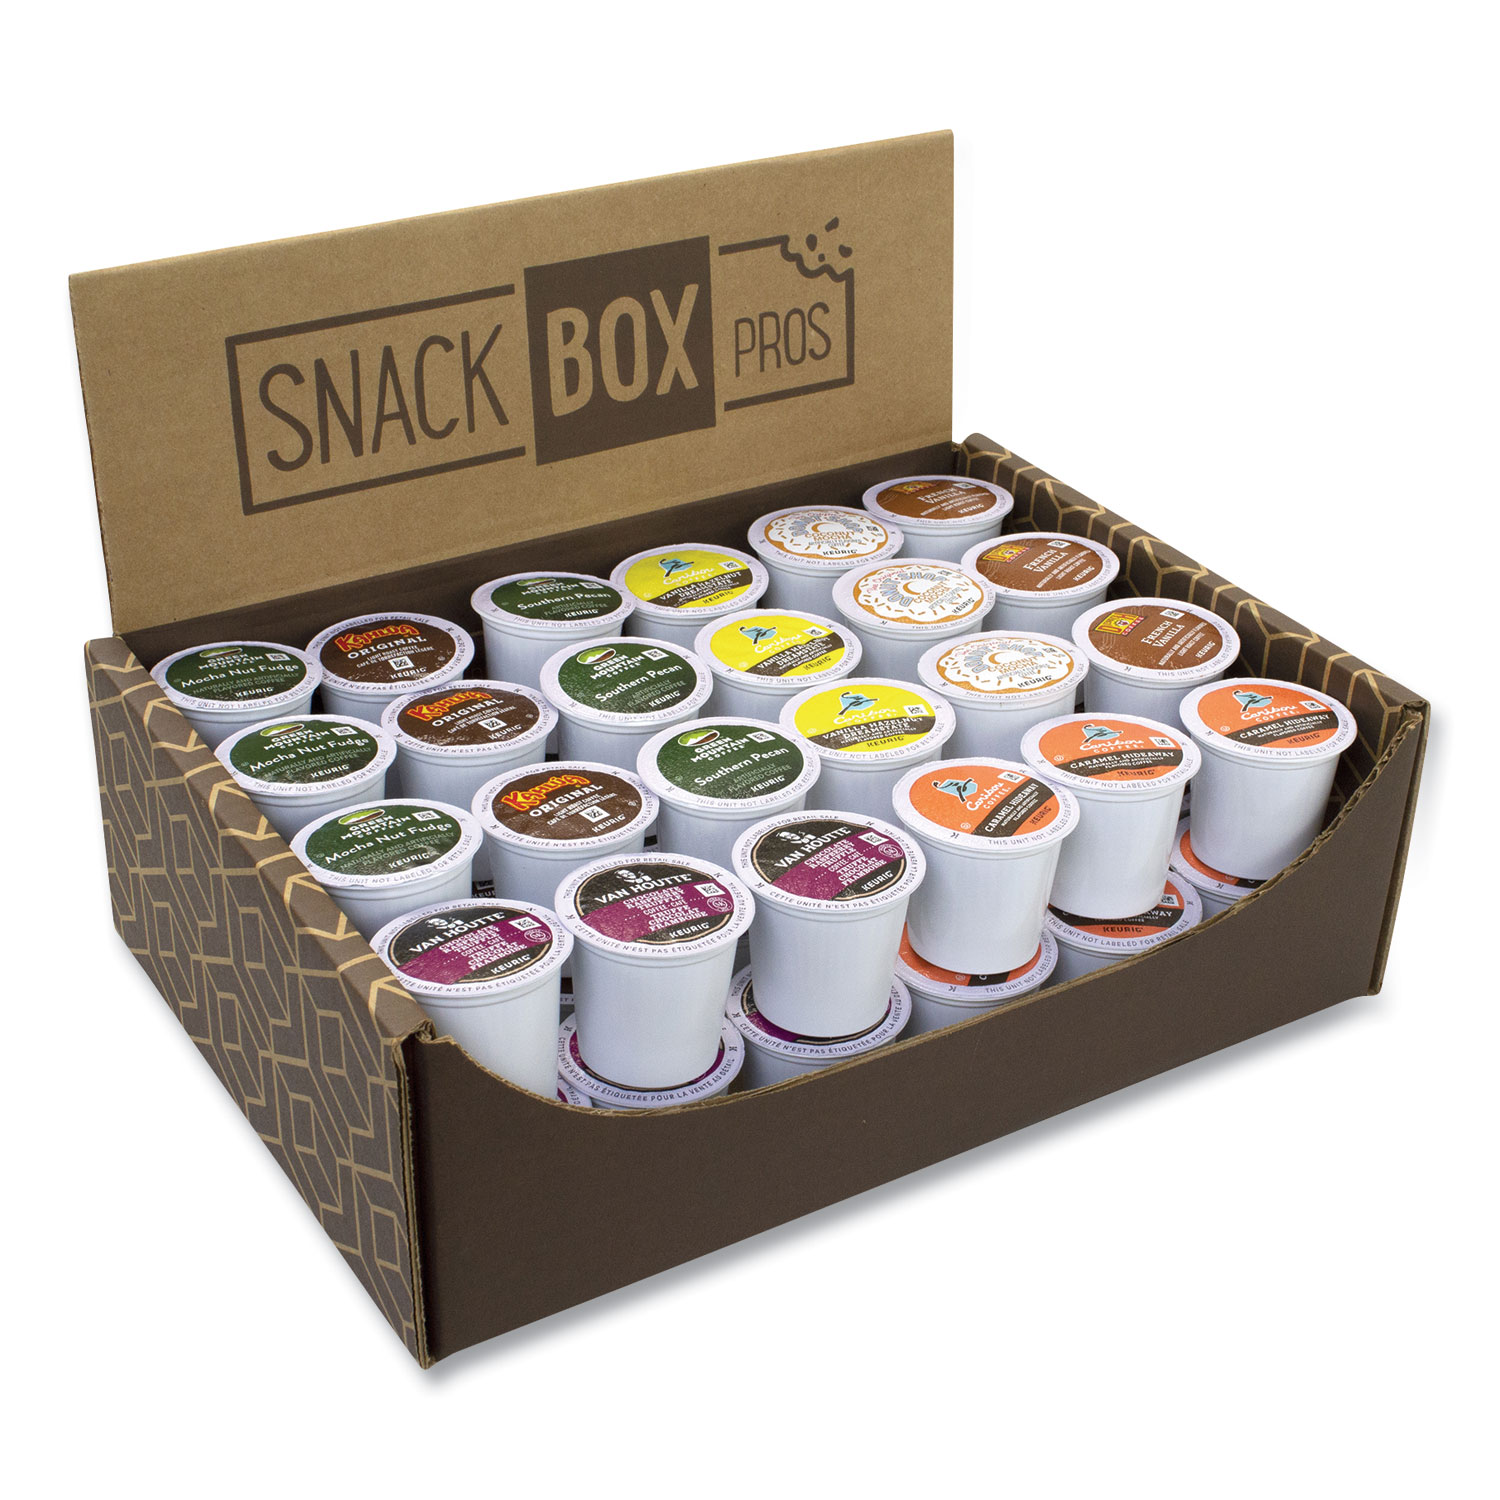  Snack Box Pros 70000038 Favorite Flavors K-Cup Assortment, 48/Box, Free Delivery in 1-4 Business Days (GRR70000038) 